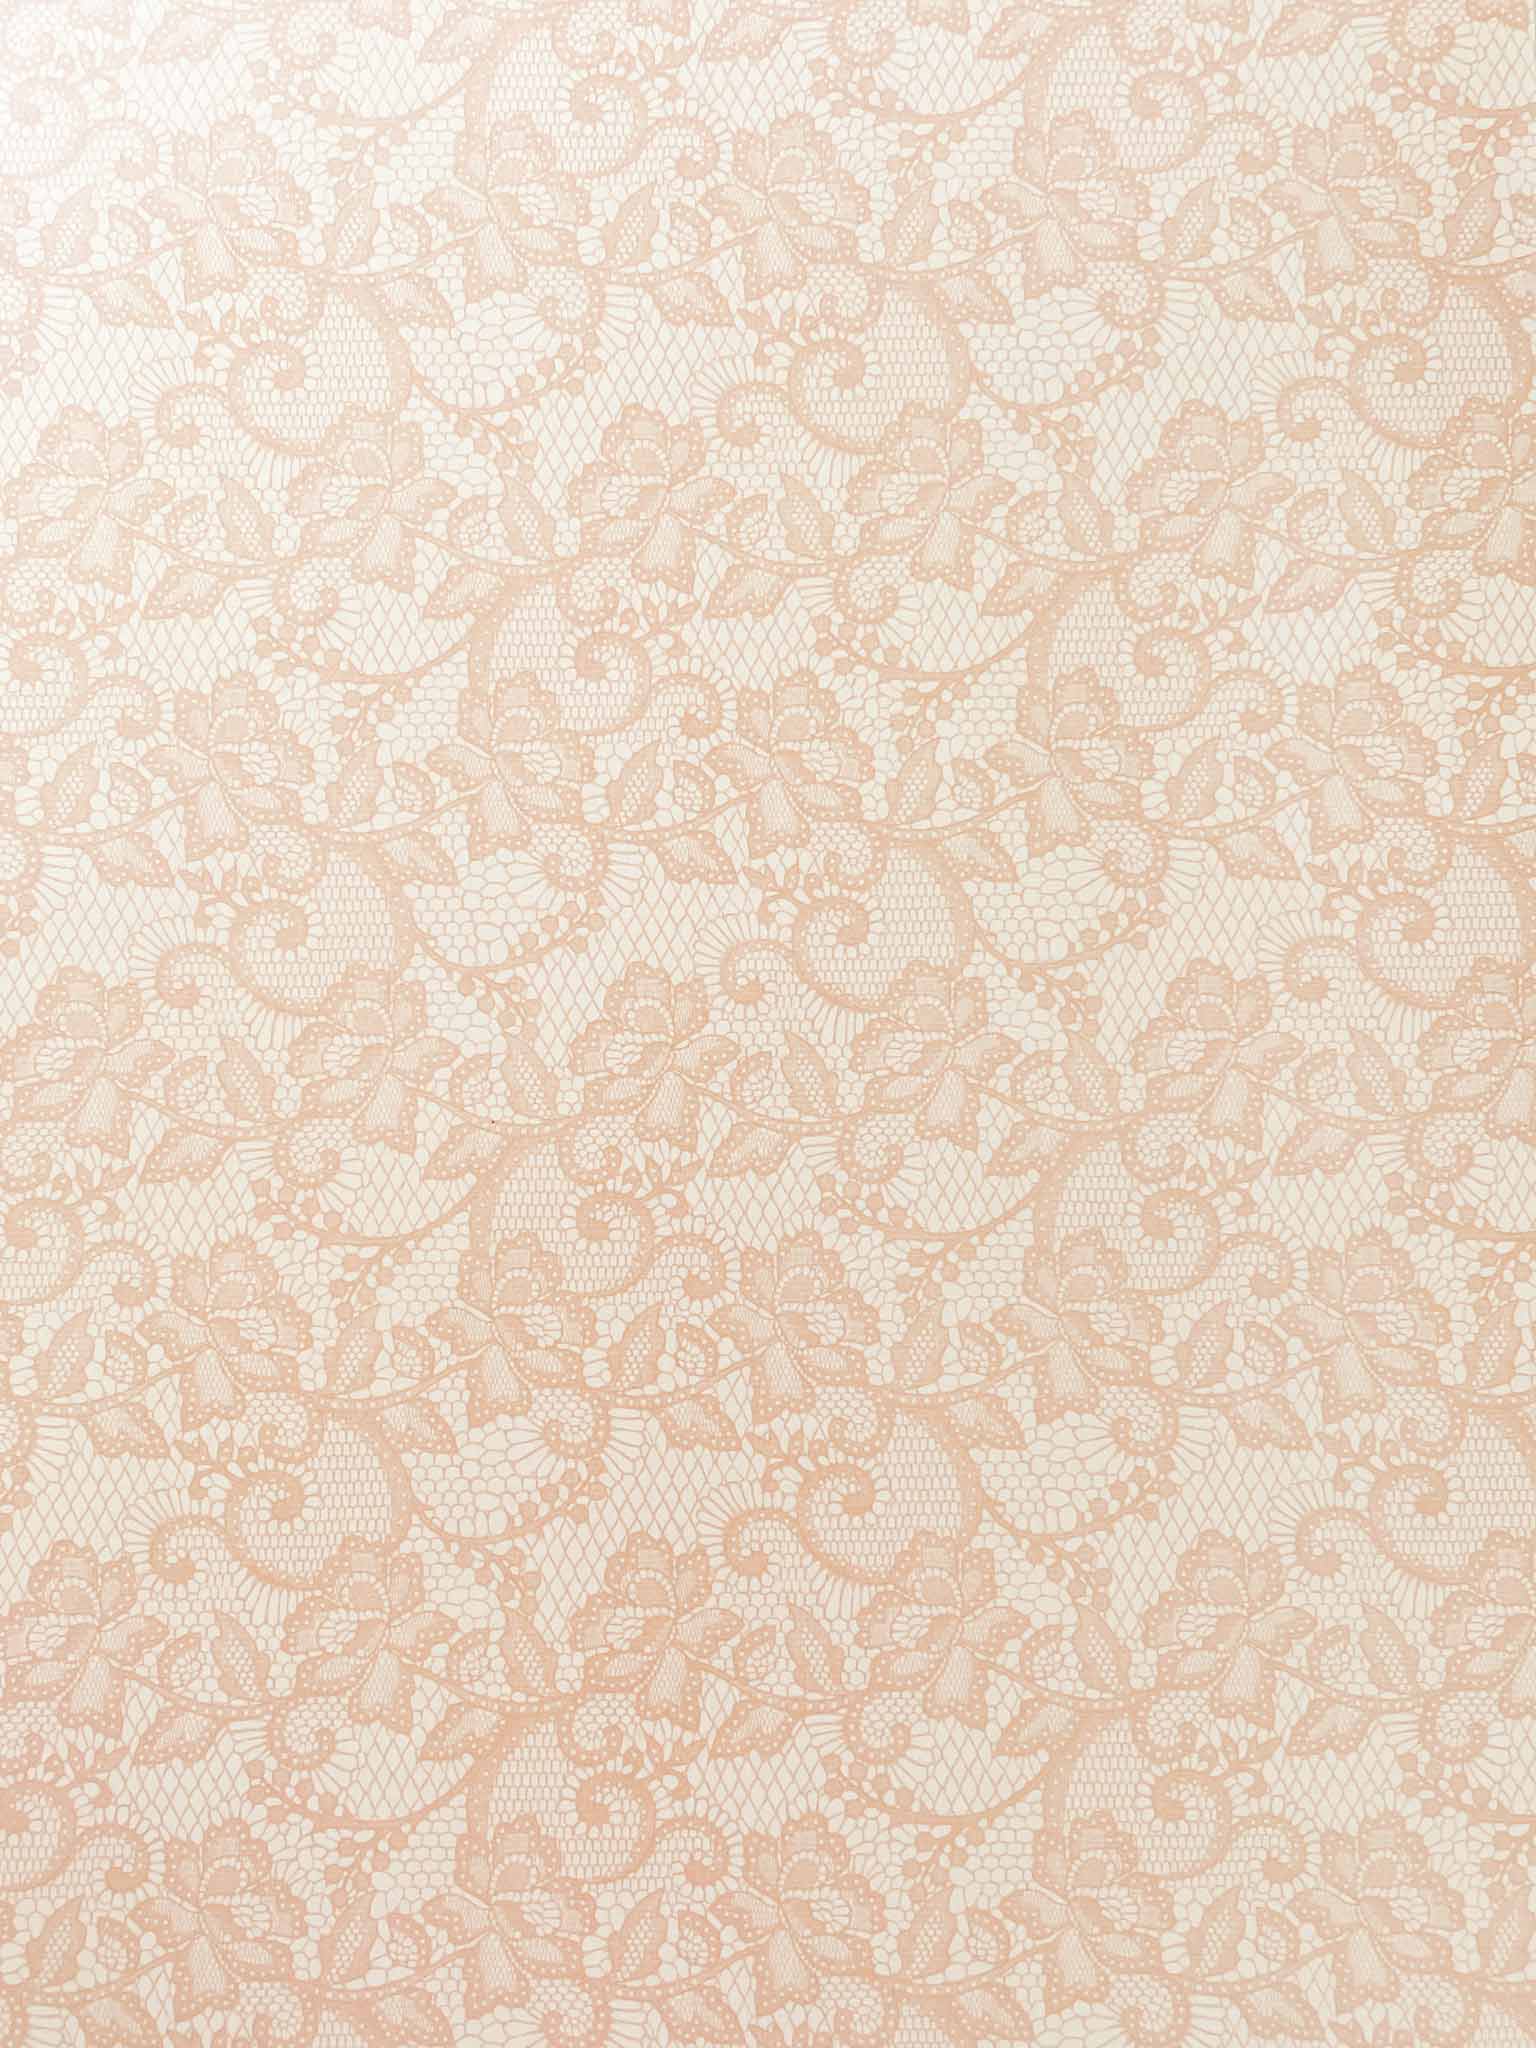 nude-lace-pattern-paper